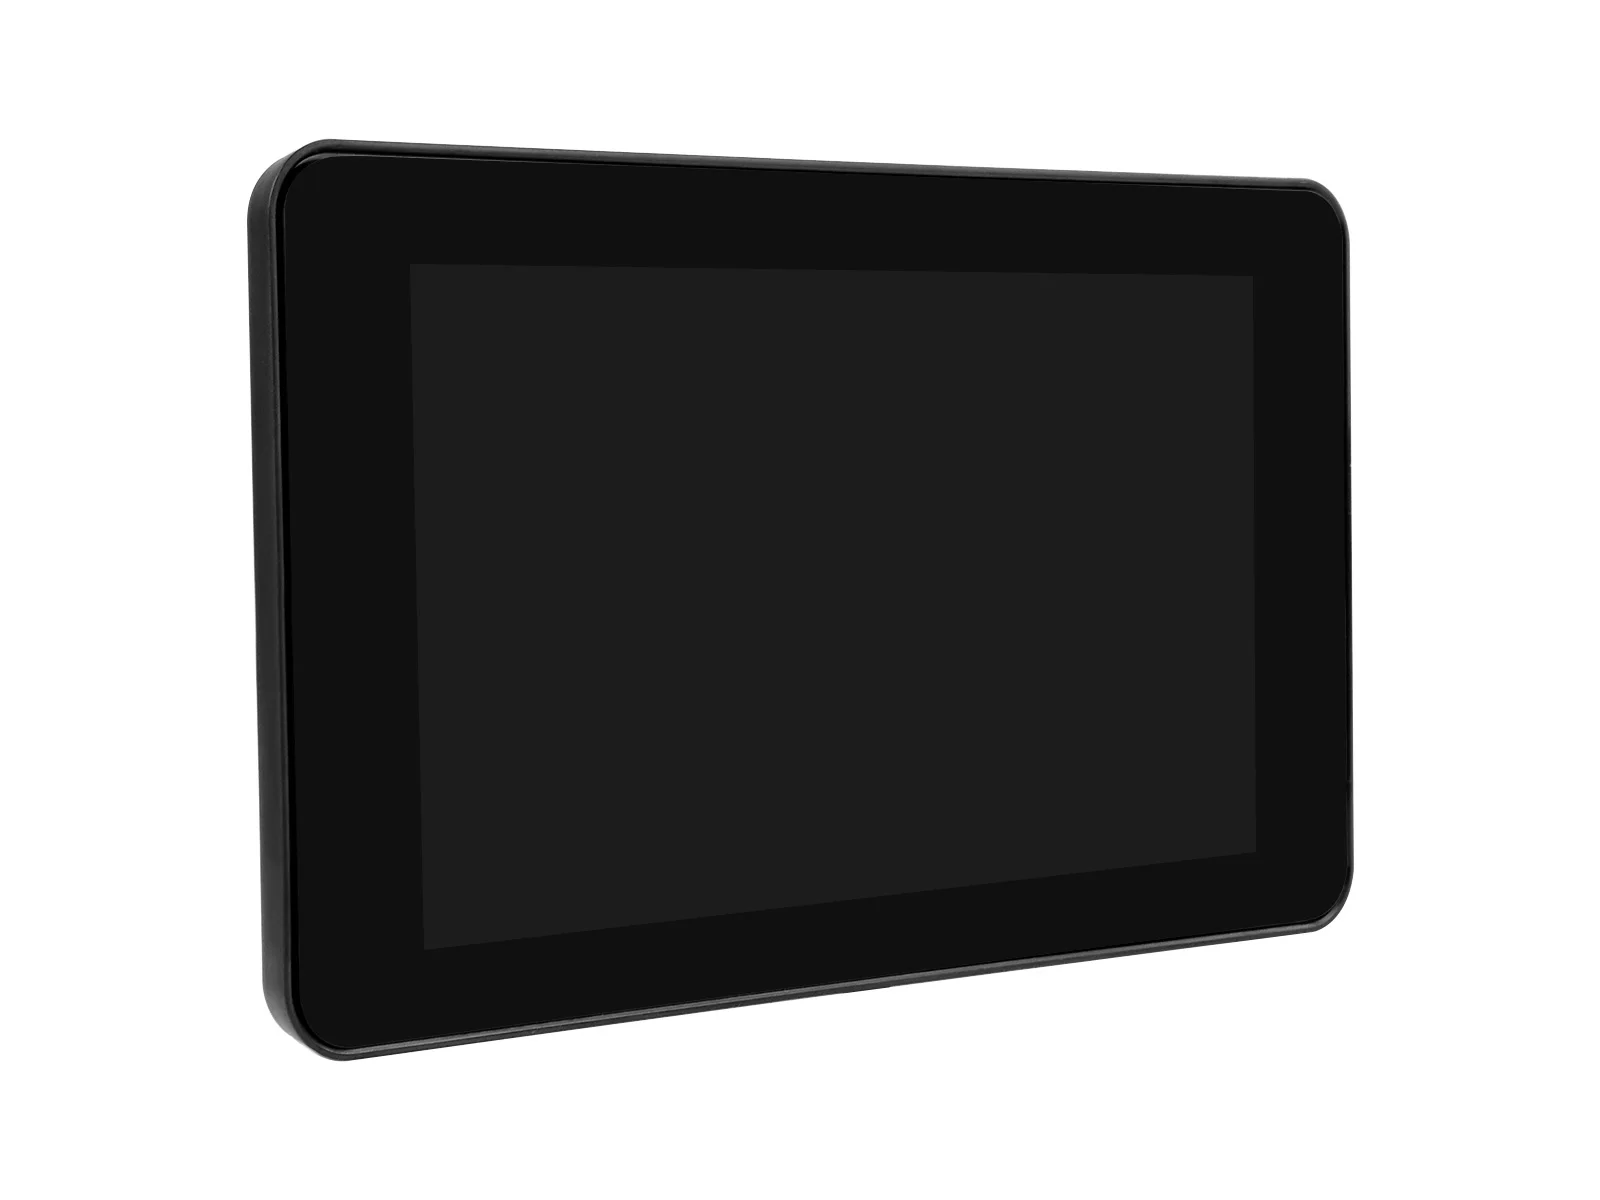 

7inch DSI LCD (with case A) 7inch Capacitive Touch Display for Raspberry Pi, with Protection Case, DSI Interface, 800×480